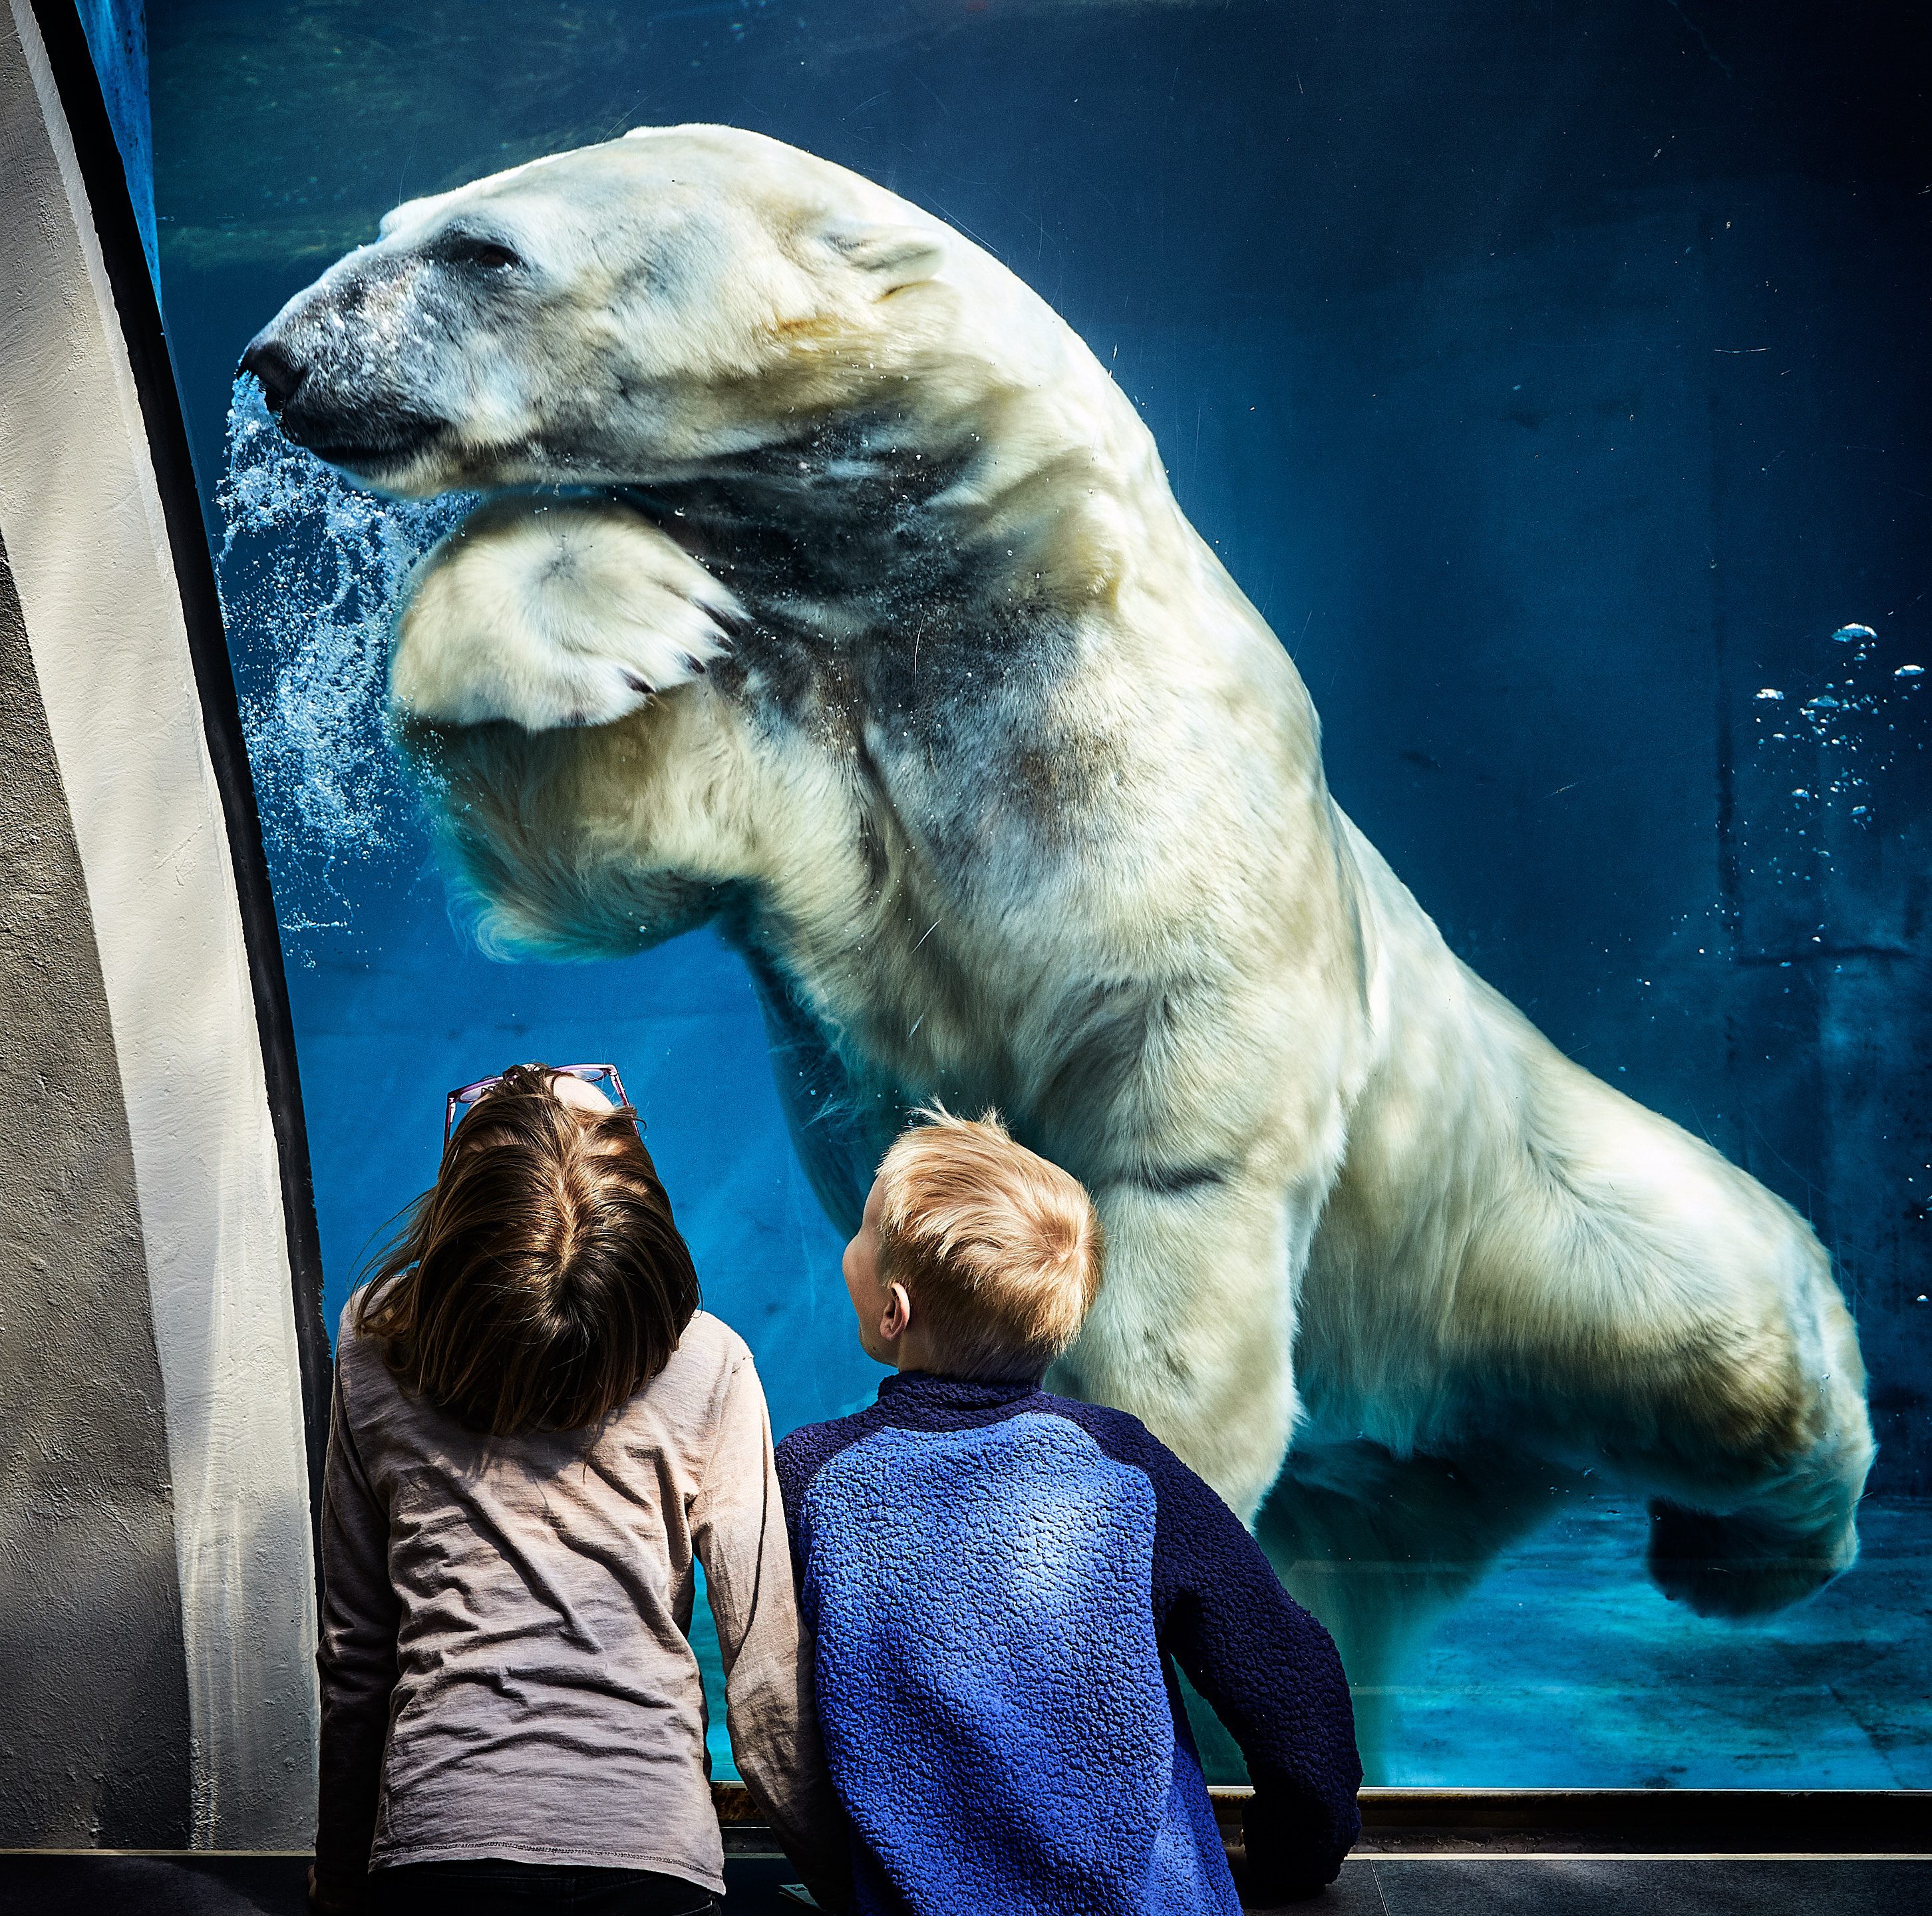 Seeing the polar bears at the PPG Aquarium is definitely on our list of 50 Things to Do in Pittsburgh This Summer.